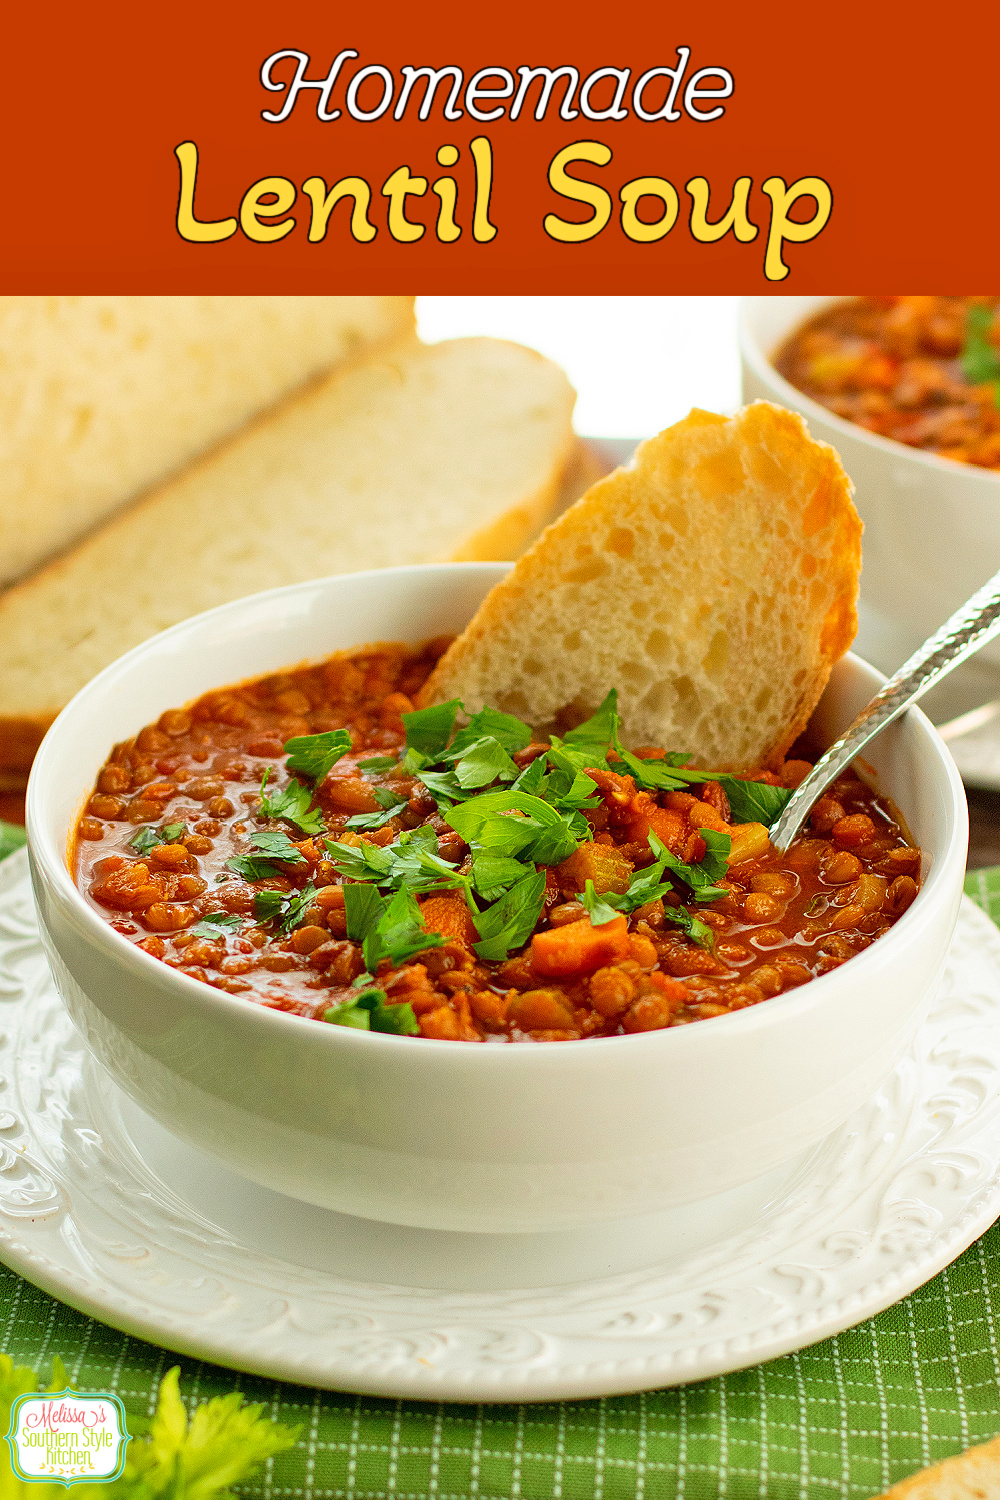 This Lentil Soup recipe is a filling dish that won't break the bank. Serve it with a side of crusty bread for dipping in the flavorful broth #lentils #lentilsoup #easysouprecipes #lentilrecipes #brownlentils #soup #souprecipes #lentilsouprecipe #brownlentilrecipes